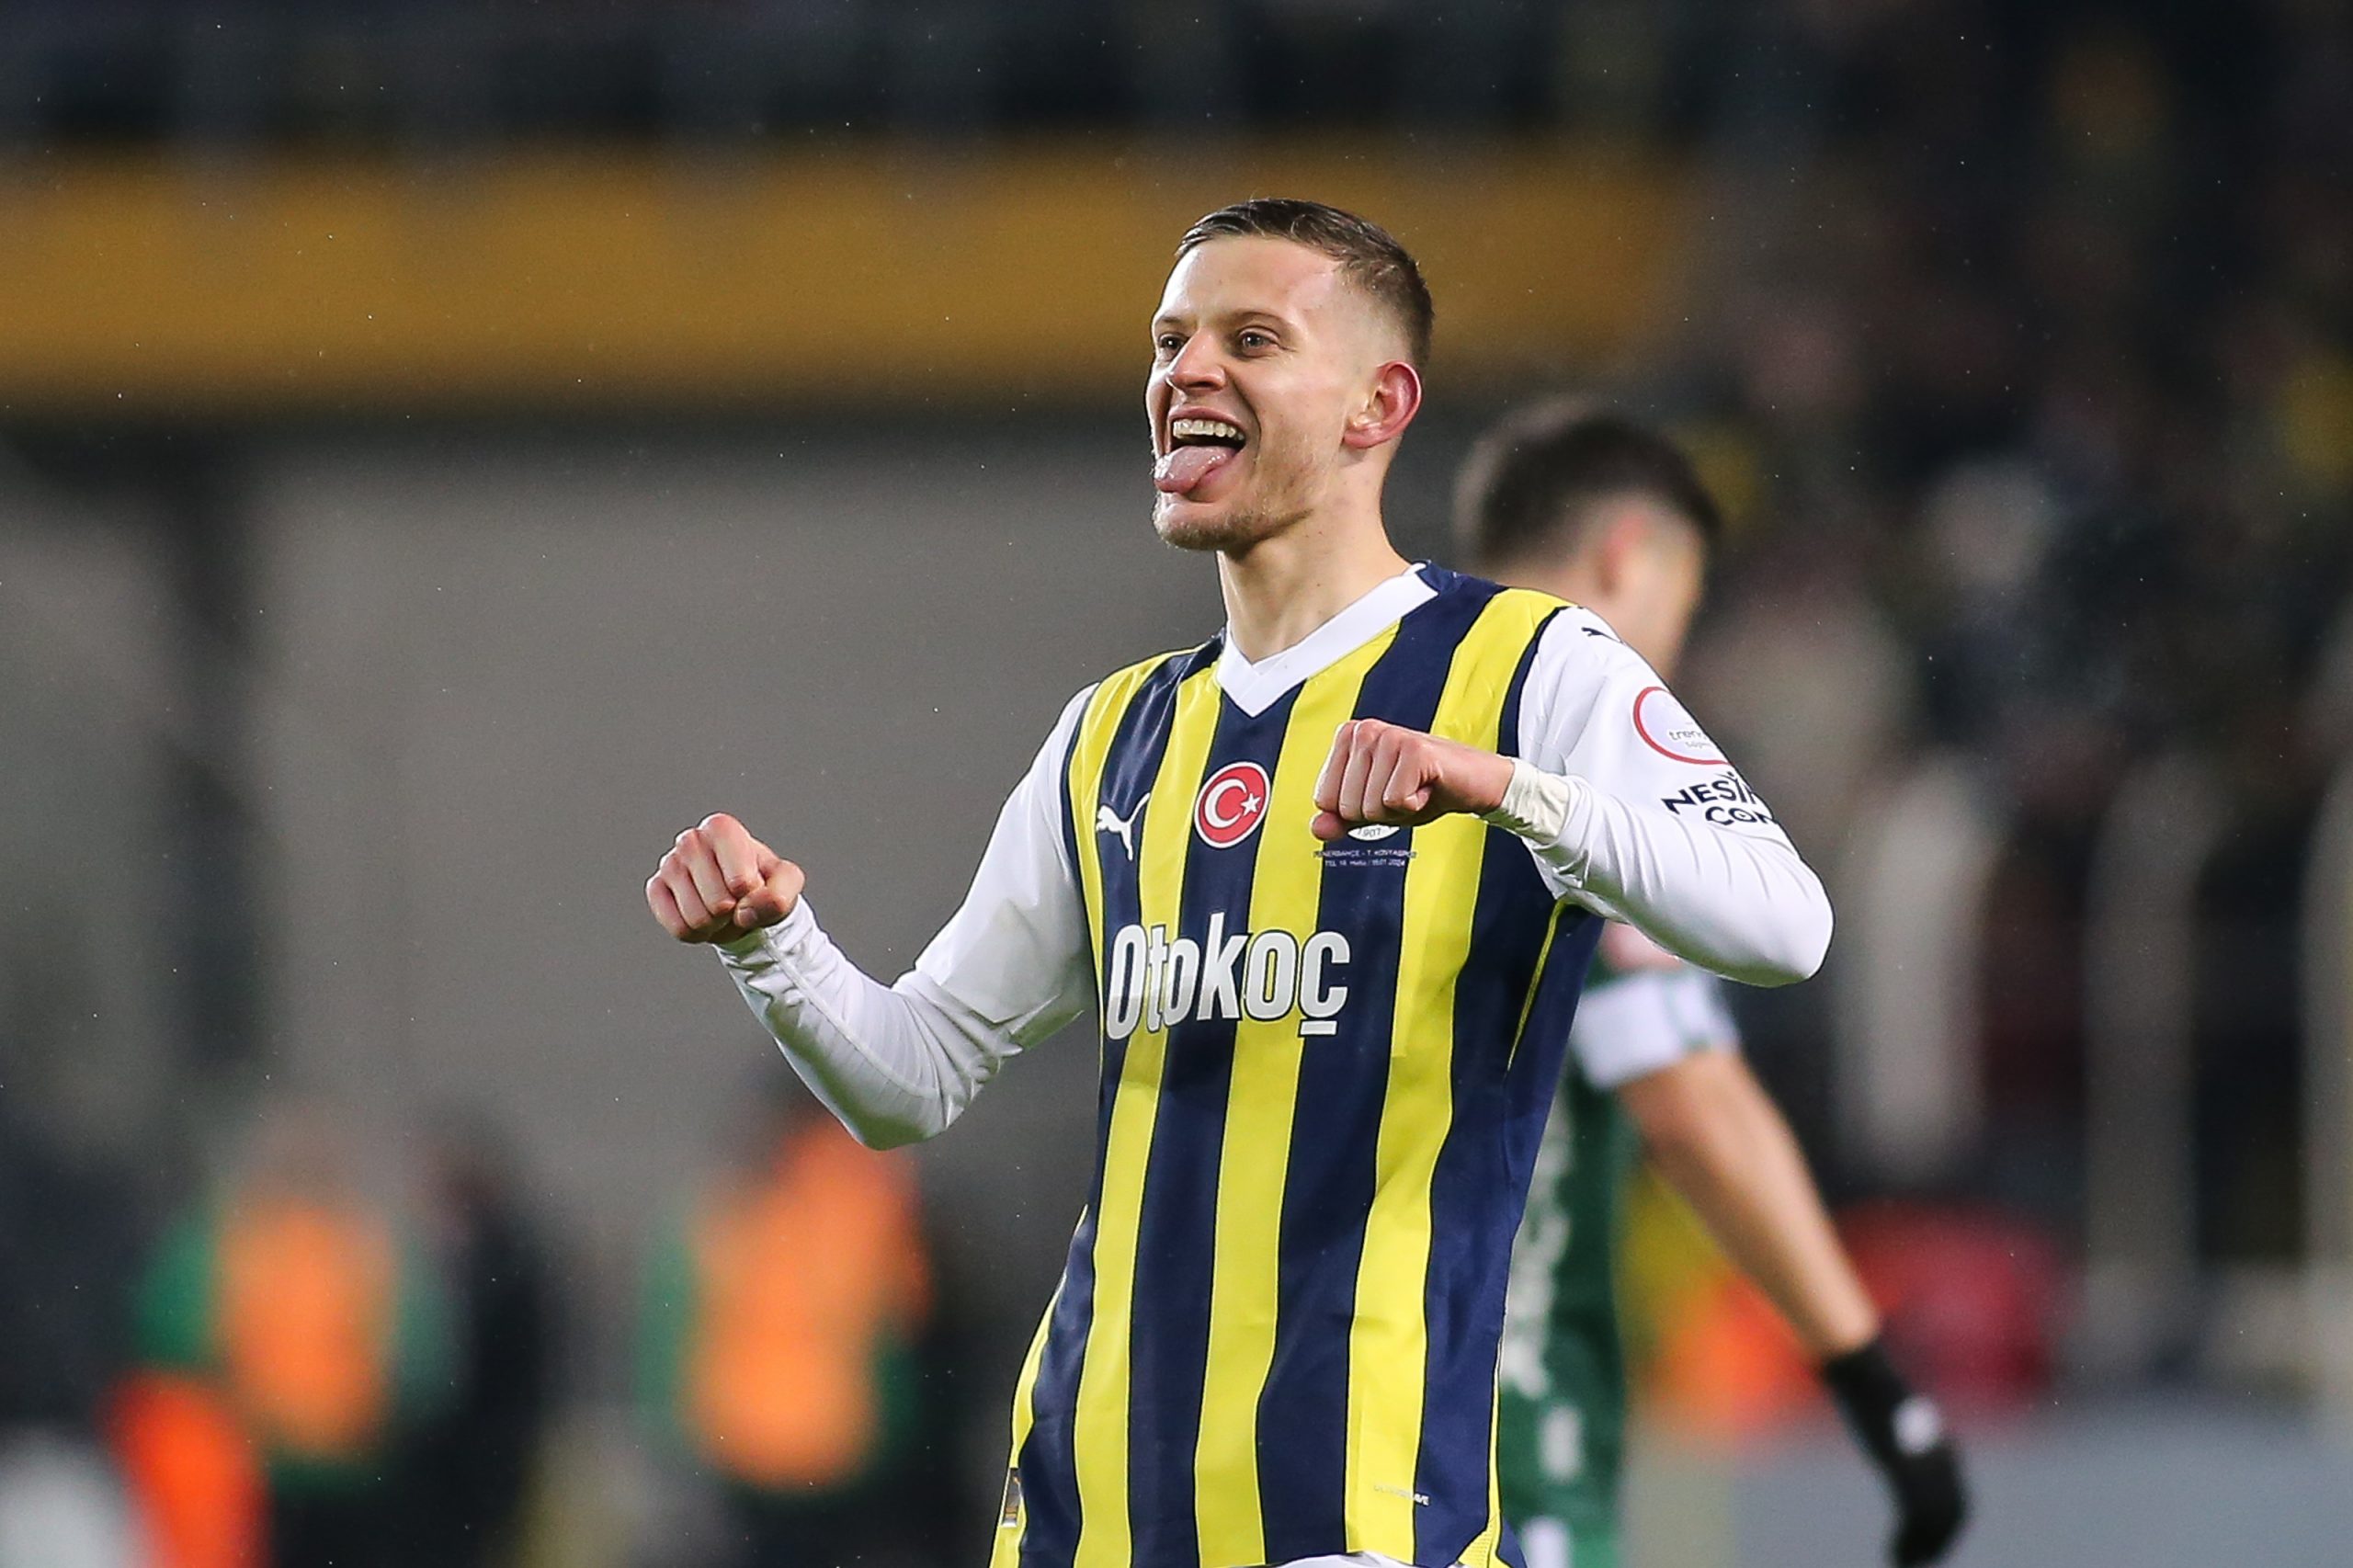 Tottenham keen on signing Fenerbahce player they scouted, Postecoglou gives green light to transfer